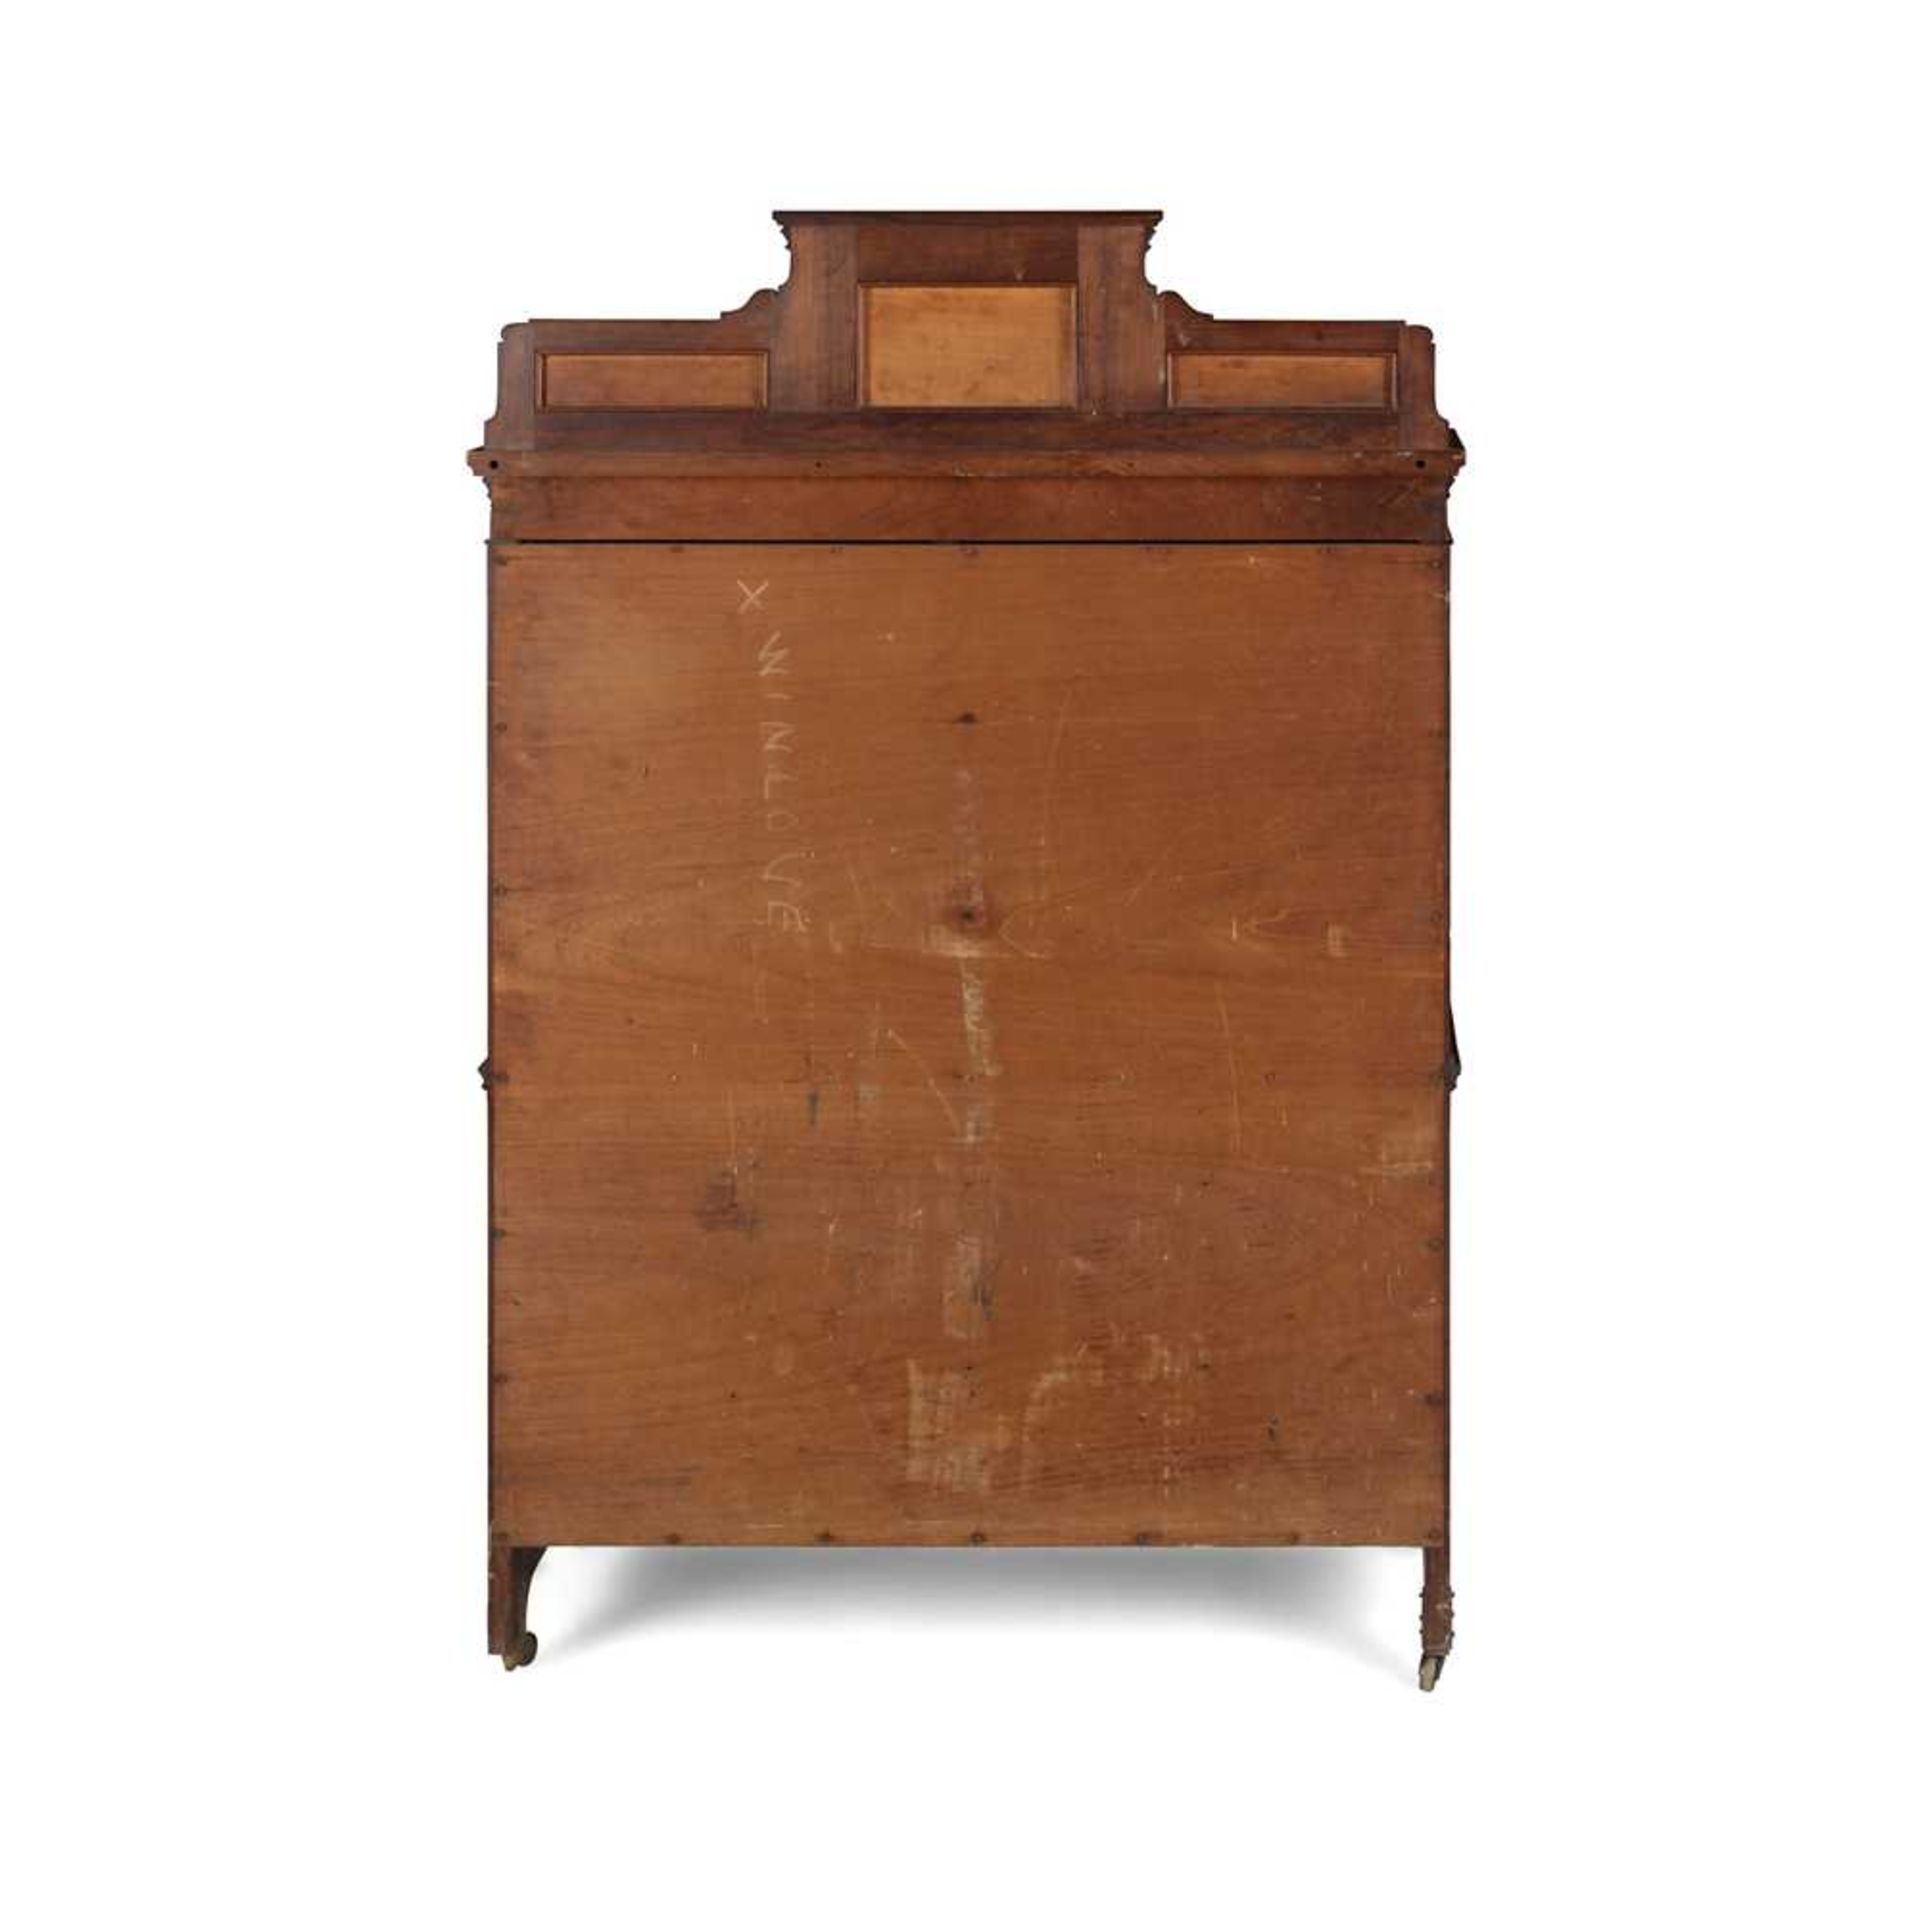 COLLINSON & LOCK, LONDON (ATTRIBUTED MAKER) AESTHETIC MOVEMENT CABINET, CIRCA 1880 - Image 2 of 2